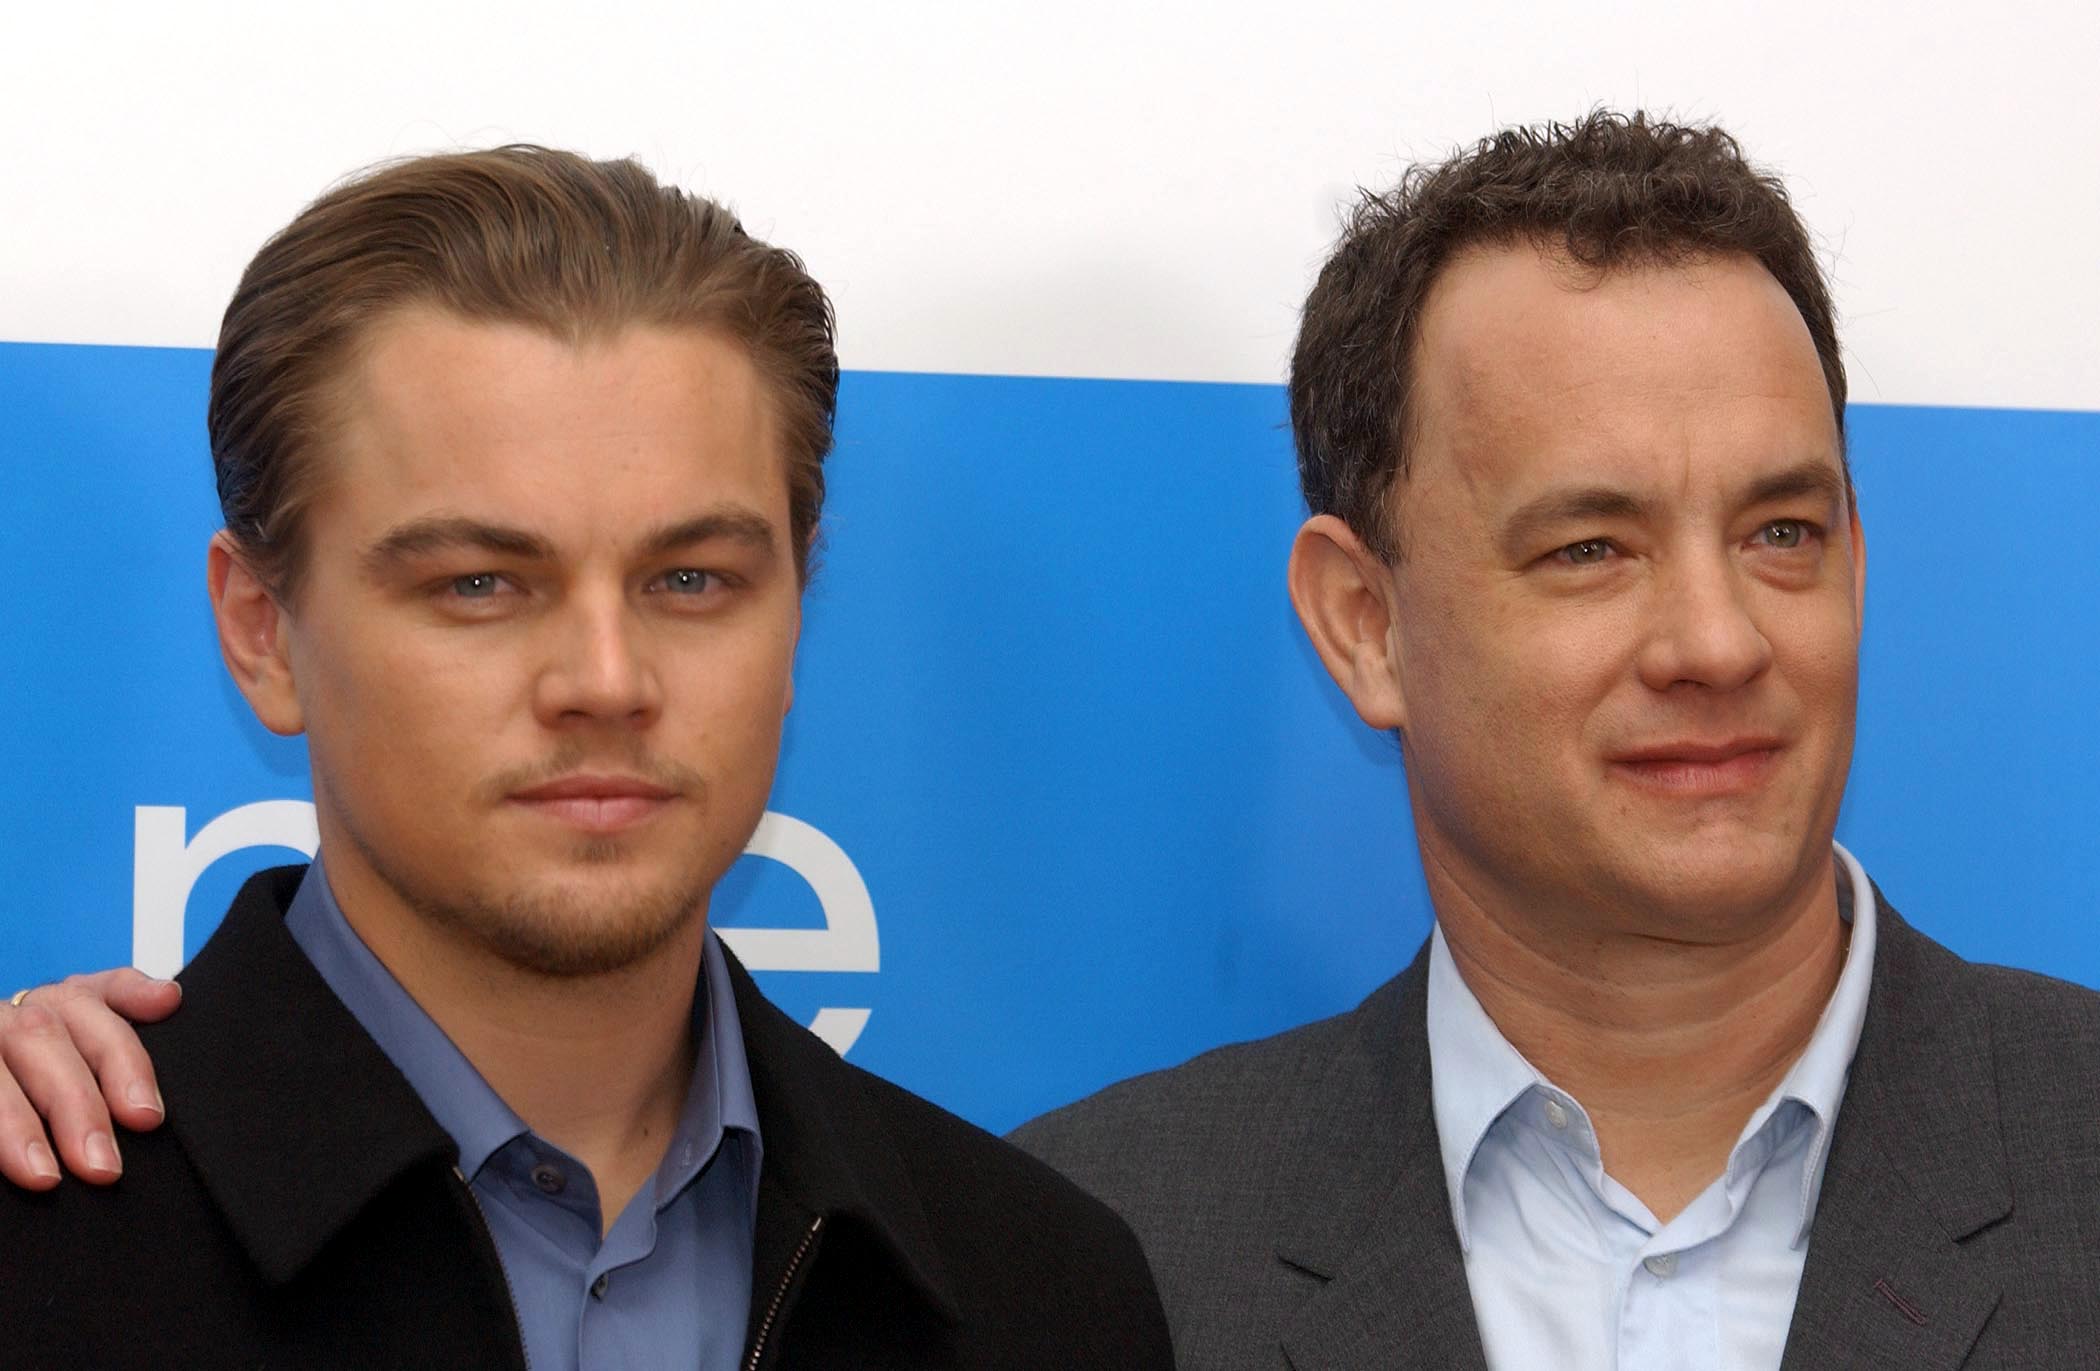 Leonardo DiCaprio stands with Tom Hanks at the Catch Me If You Can press conference